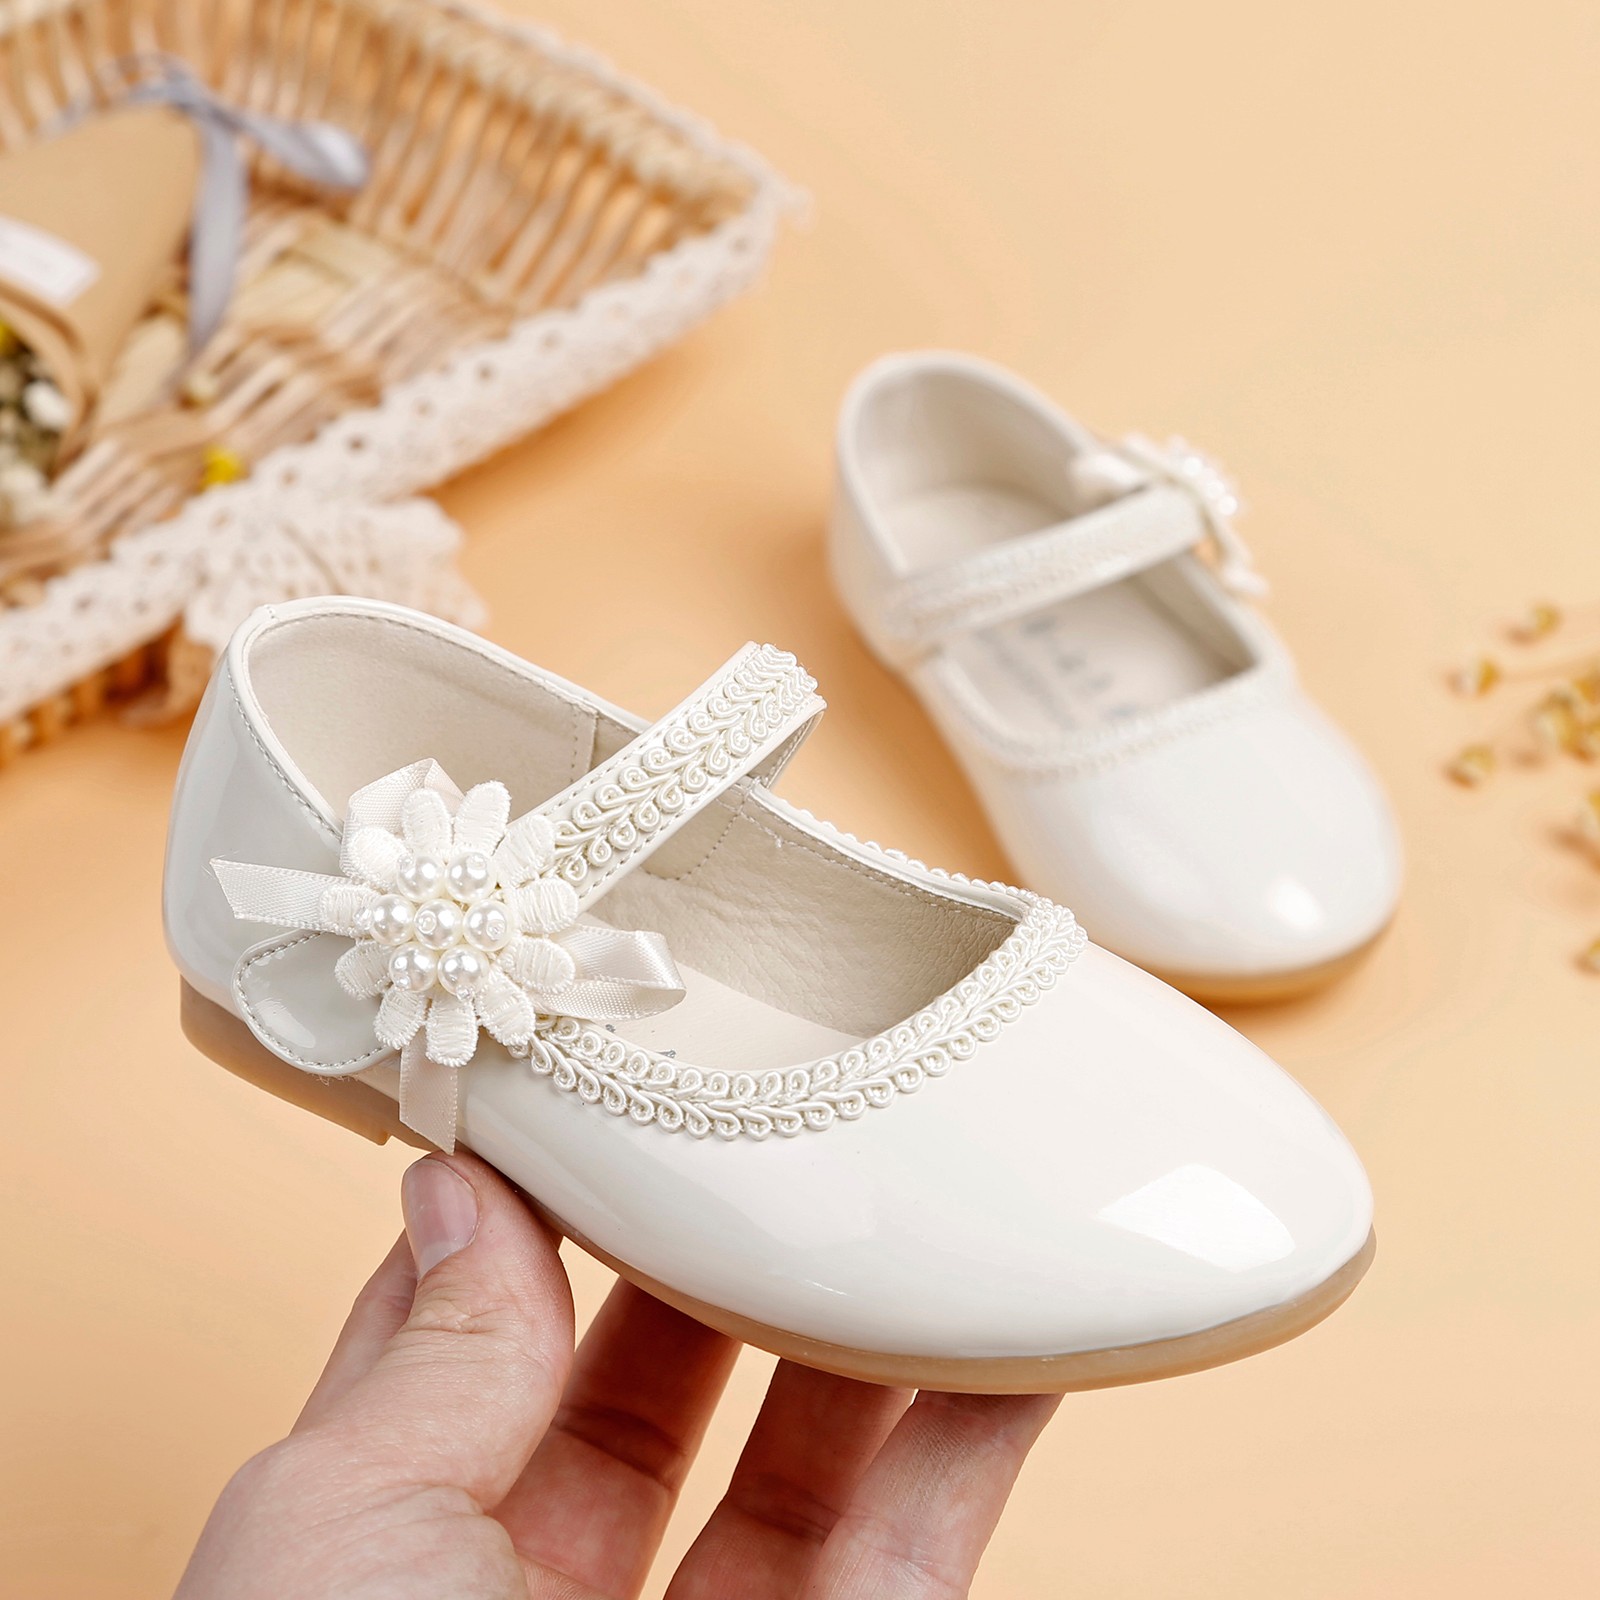 Cathalem Girls Dress Wedge Shoes Girl Shoes Small Leather Shoes Single Shoes Children Dance Shoes Girls Slip on Toddler Beige 3 Years - image 1 of 5